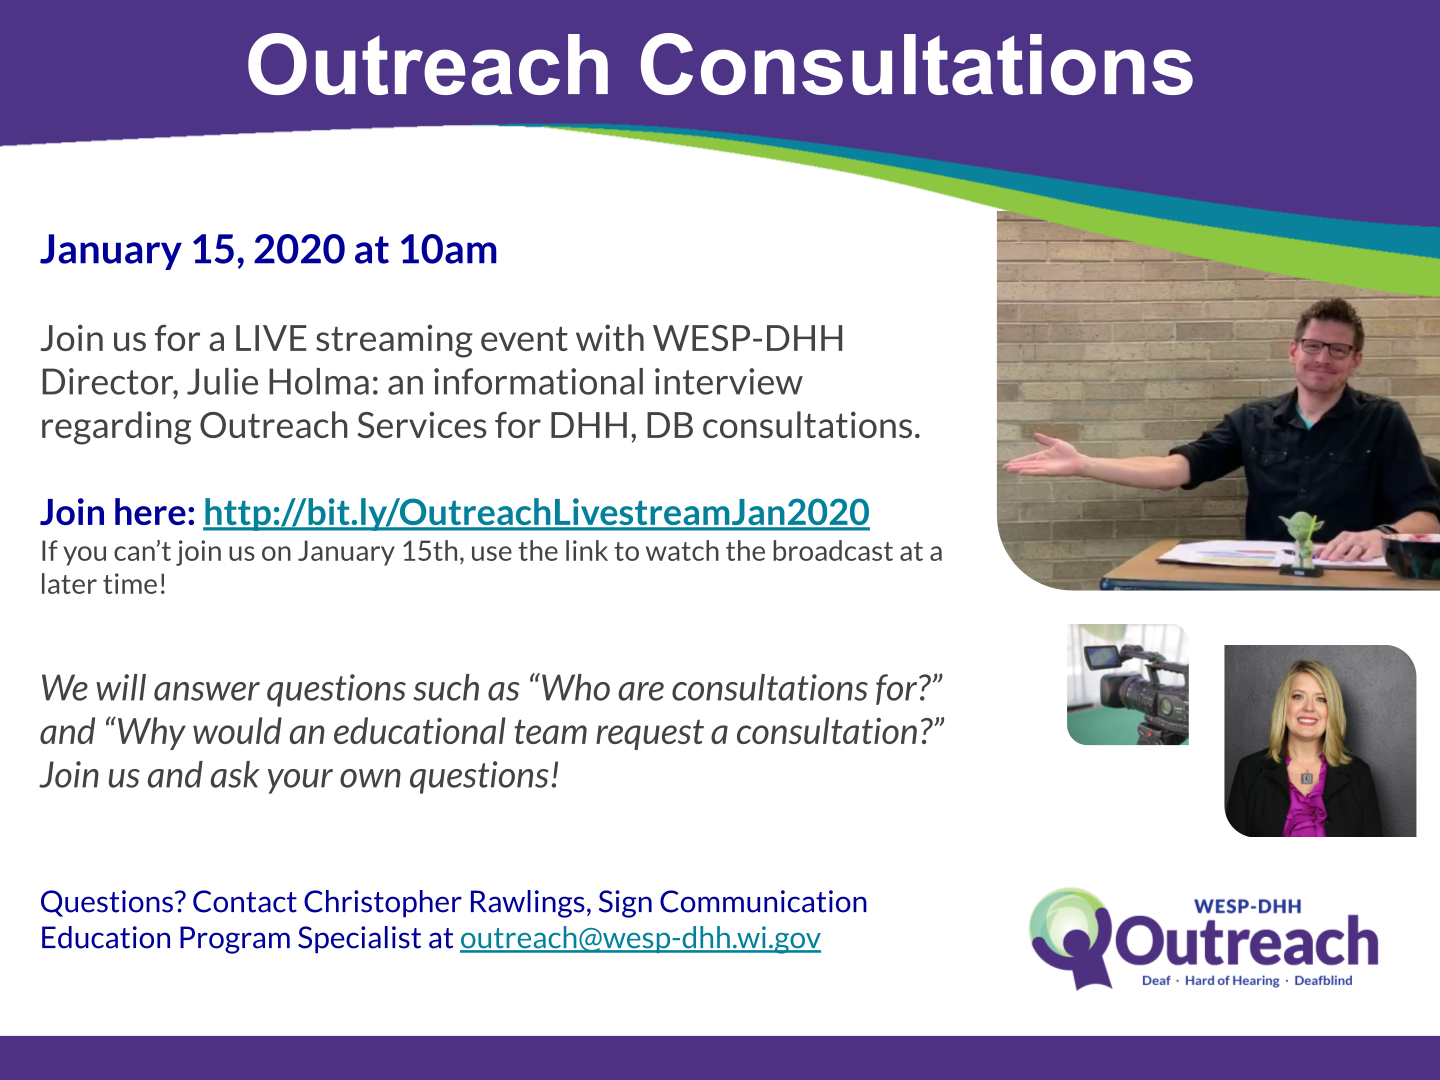 Promotional flyer. The header reads: Outreach Consultations in white text against a purple background. The text reads: January 15, 2020 at 10am. Join us for a LIVE streaming event with WESP-DHH Director, Julie Holma: an informational interview regarding Outreach Services for DHH, DB consultations. Join here: http://bit.ly/OutreachLivestreamJan
If you can’t join us on January 15th, use the link to watch the broadcast at a later time! We will answer questions such as “Who are consultations for?” and “Why would an educational team request a consultation?” Join us and ask your own questions! Questions? Contact Christopher Rawlings, Sign Communication Education Program Specialist at outreach@wesp-dhh.wi.gov  Three photos and the Outreach logo are on the right side of the layout. The photos include a man sitting at a desk with his right arm reaching out to his side, a video camera facing away from the camera, and the portrait of a woman with shoulder length blonde hair standing against a gray wall.